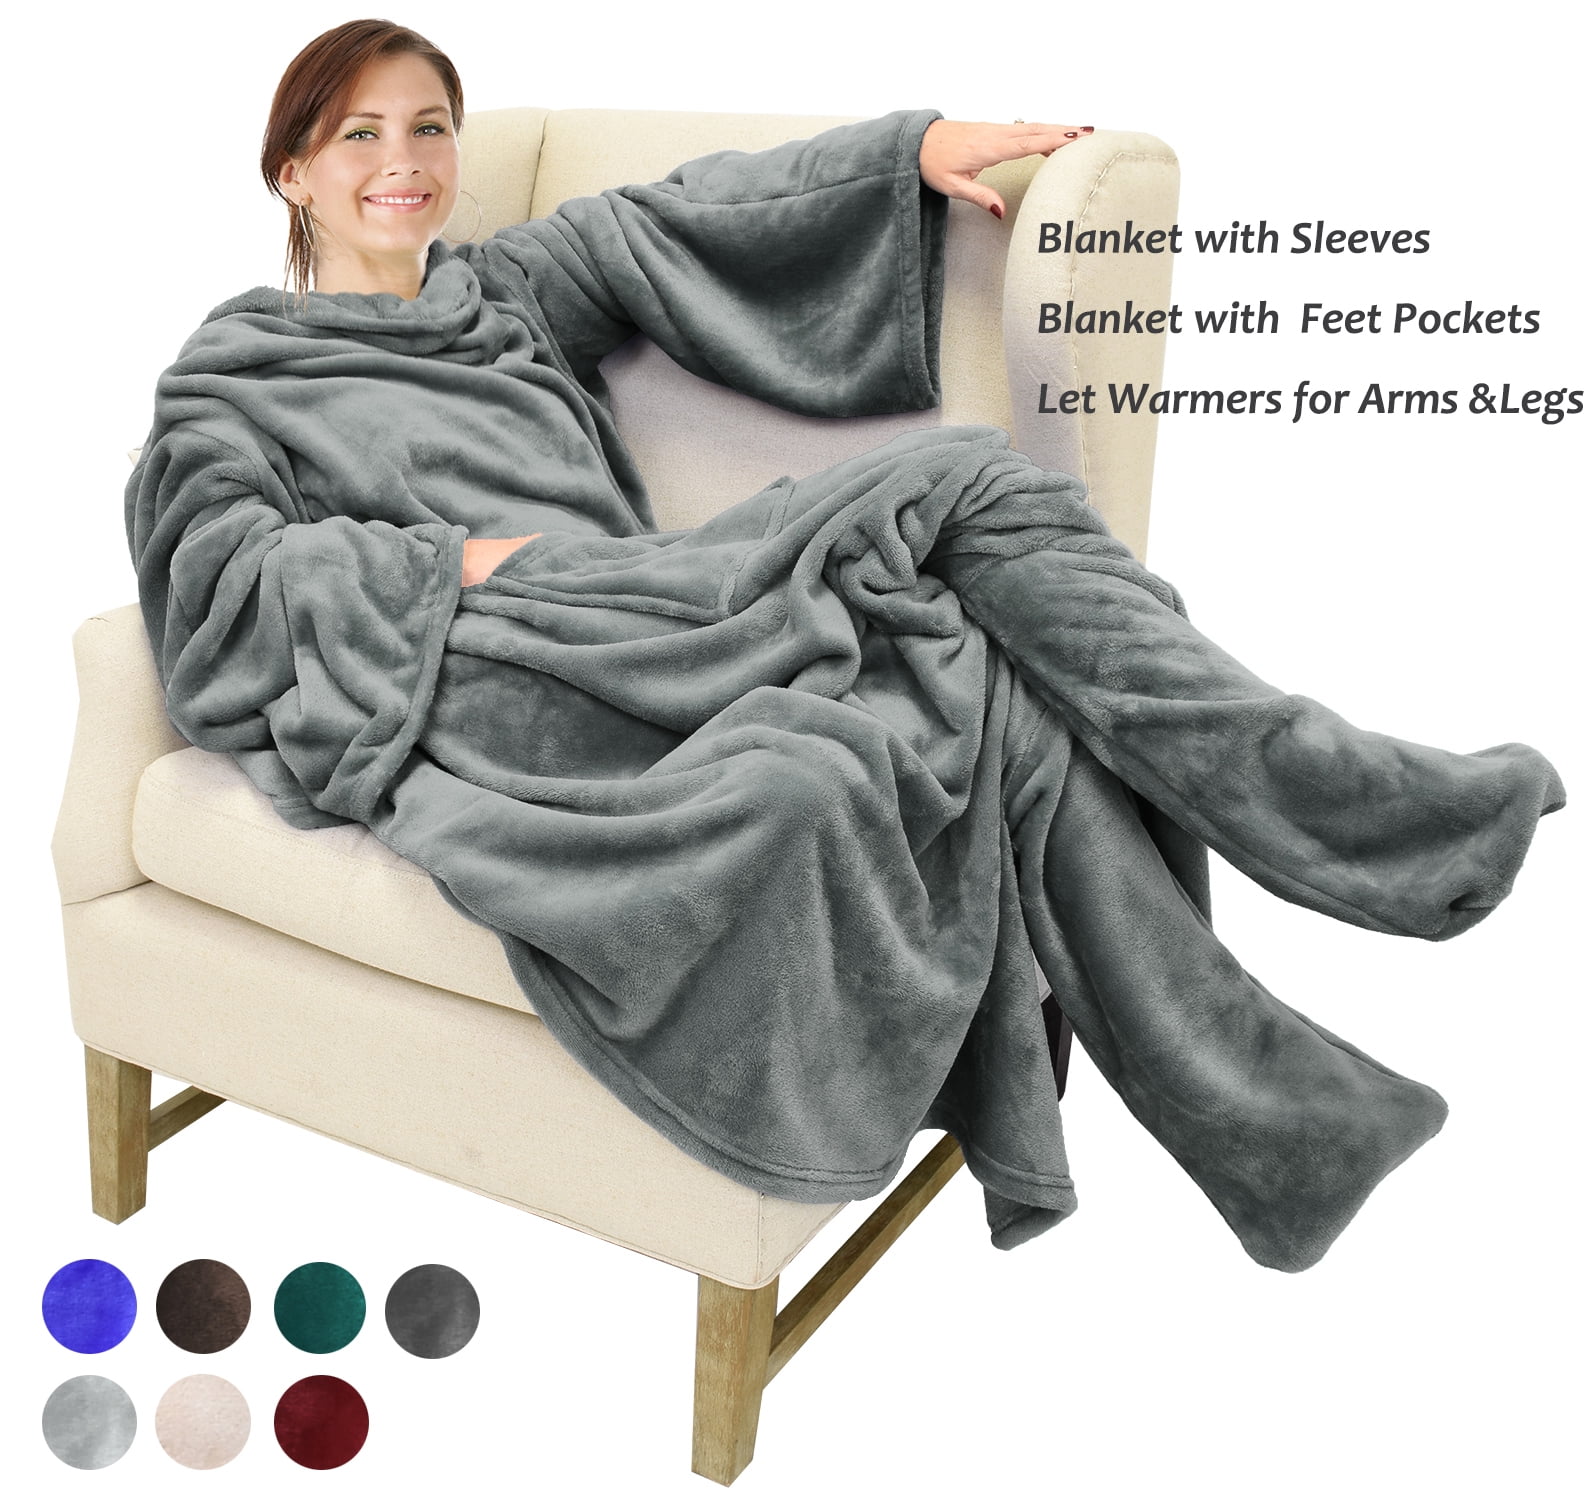 Details about   180cm Soft Fleece Wearable Blankets with Sleeves Cozy Wrap Warm Throw Travel 